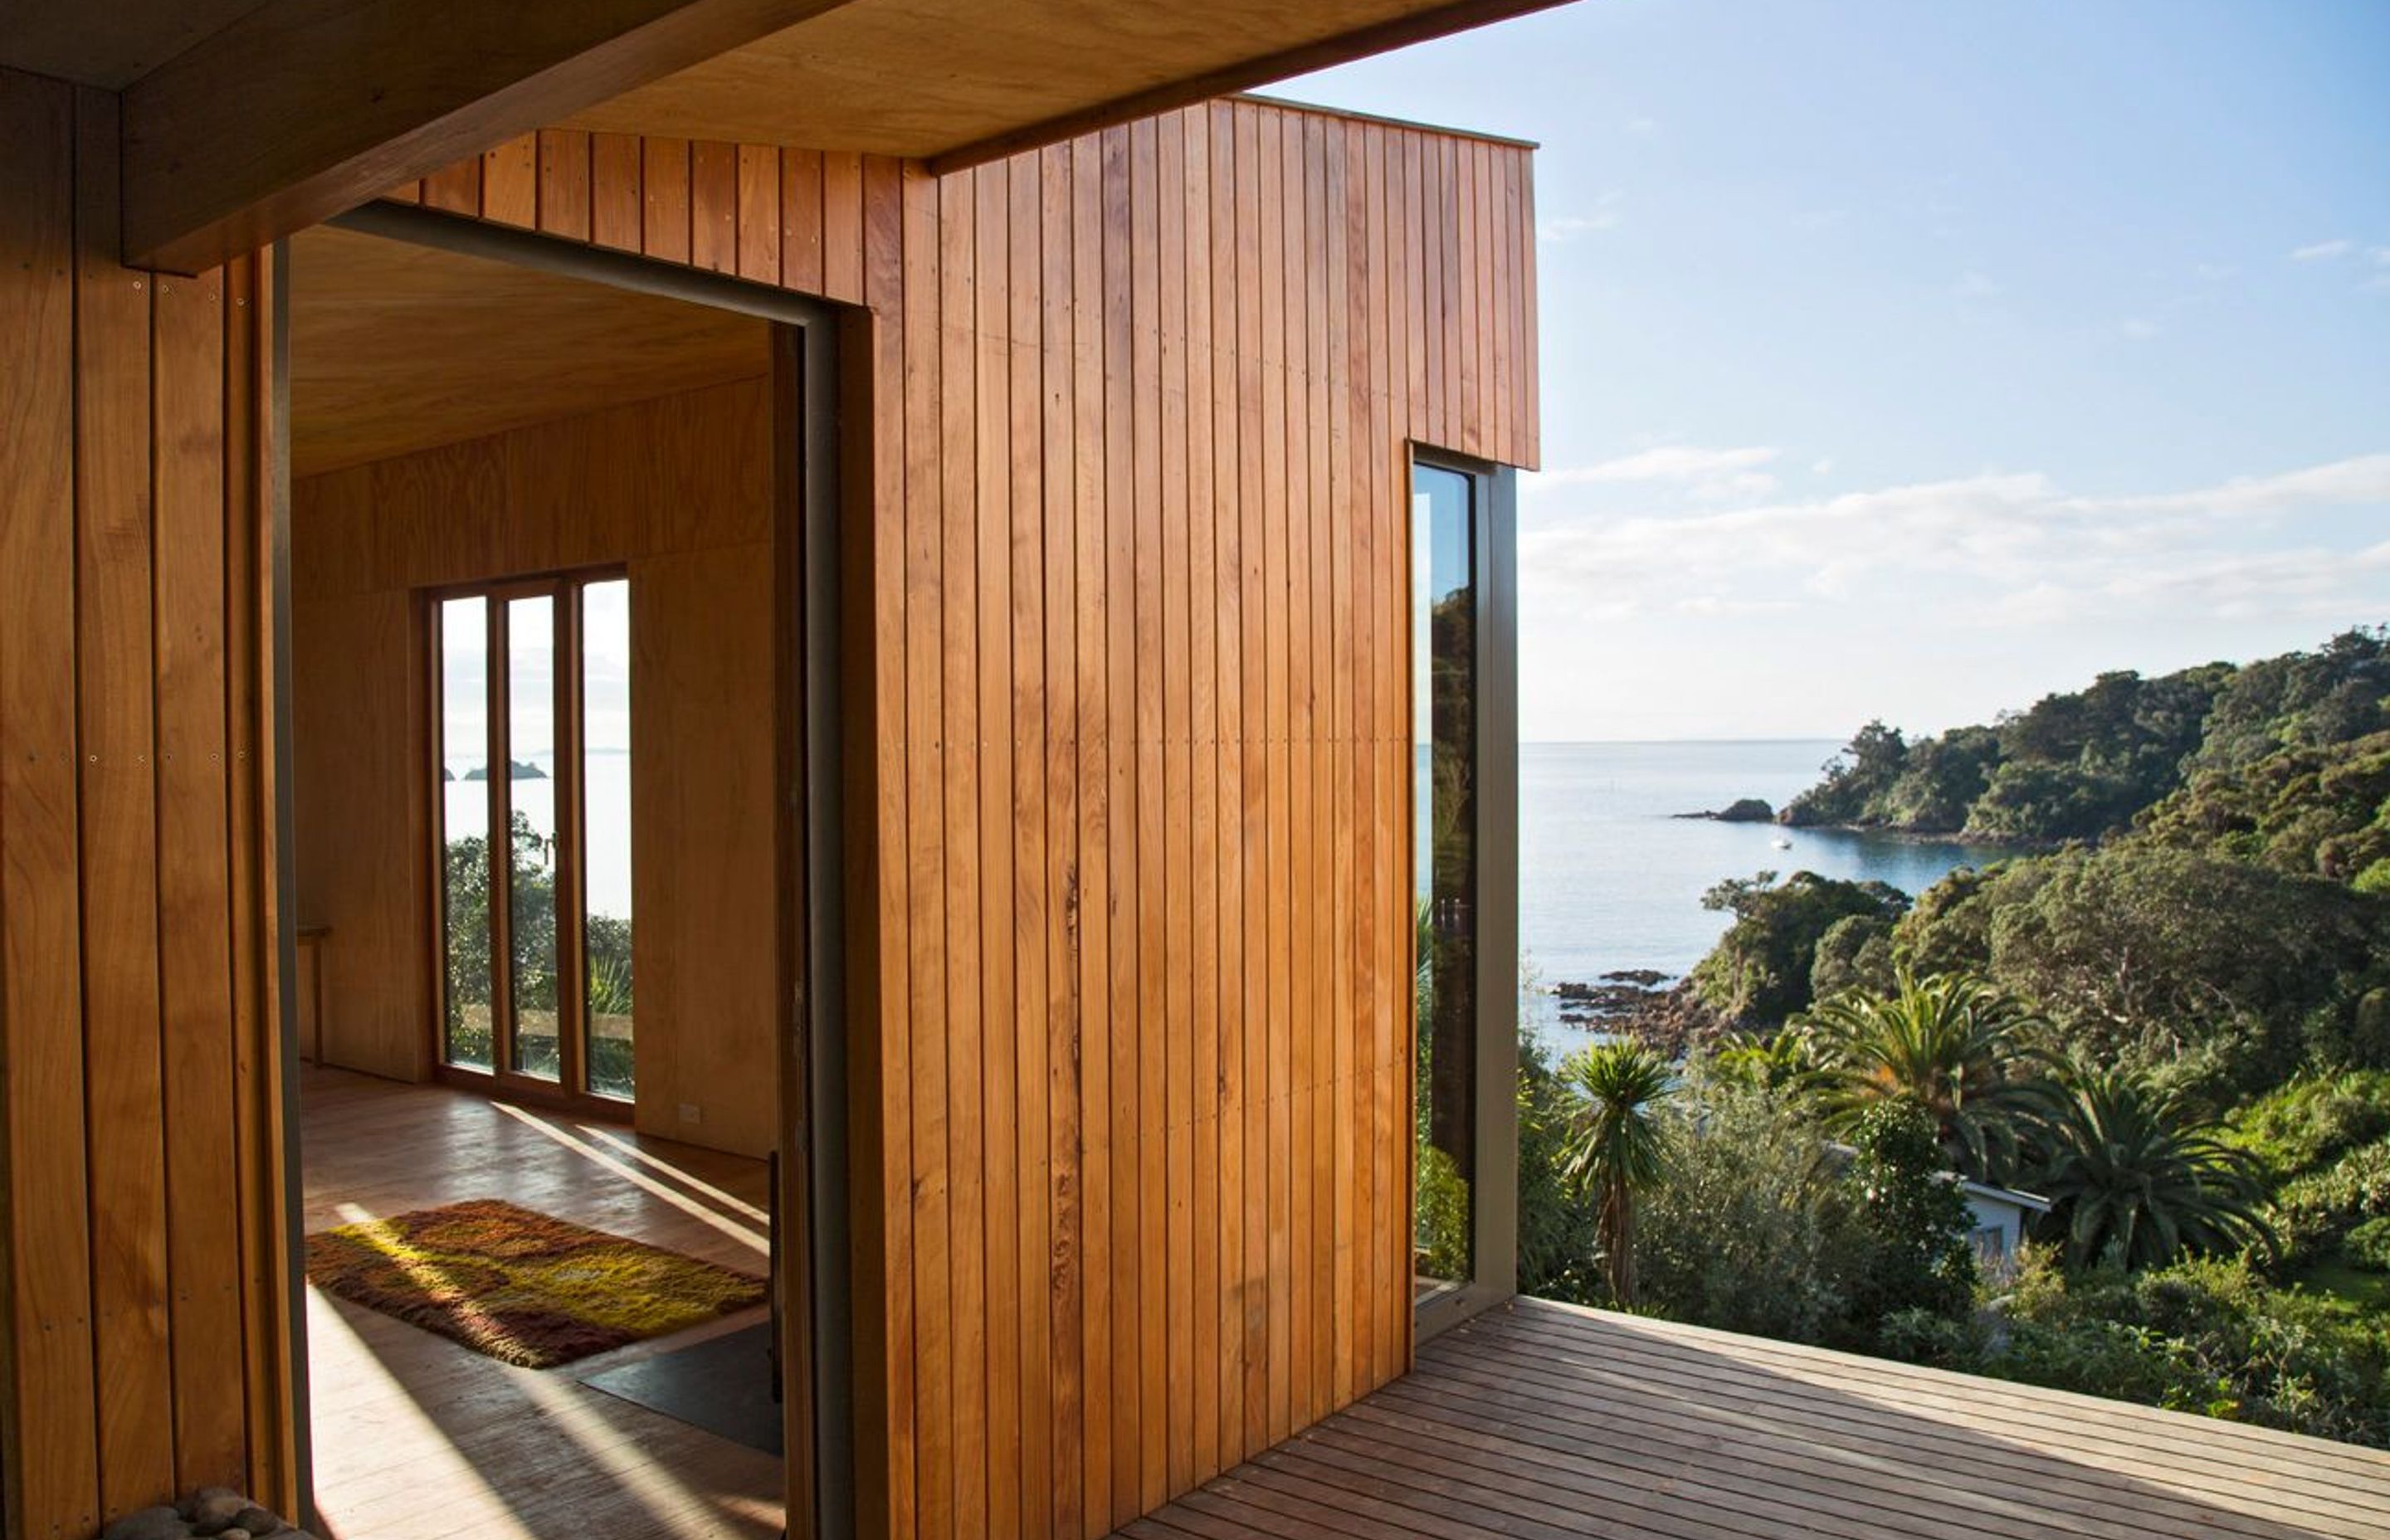 Located at Hekerua Bay on Waiheke Island, Cora House by Bonnifait + Giesen is orientated to take in the ocean view, while protecting the interior from cold and wind during winter and excessive sunlight during summer. Photograph by Russell Kle